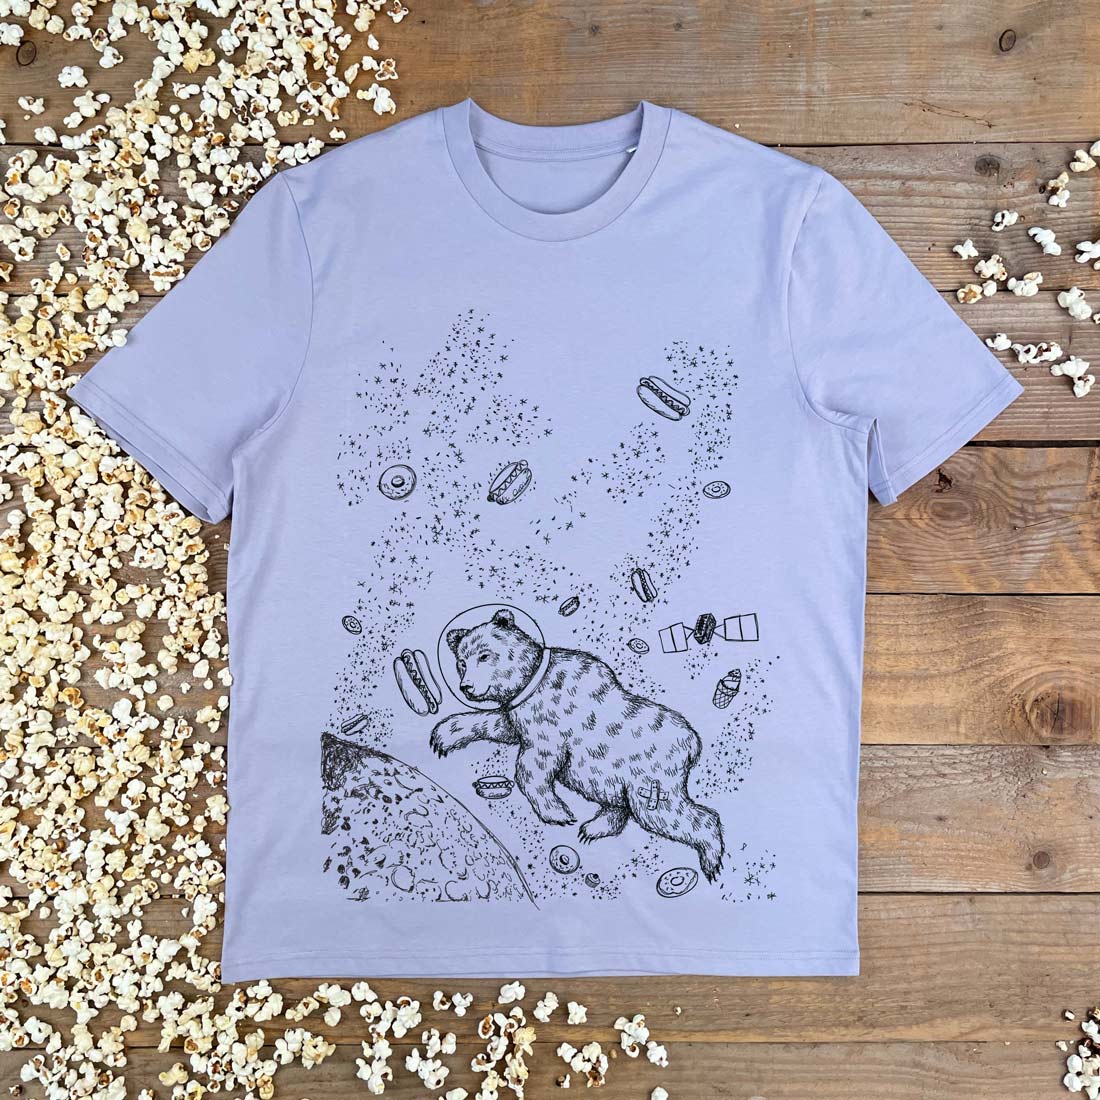 lilac teshirt with bear and hot dogs in space